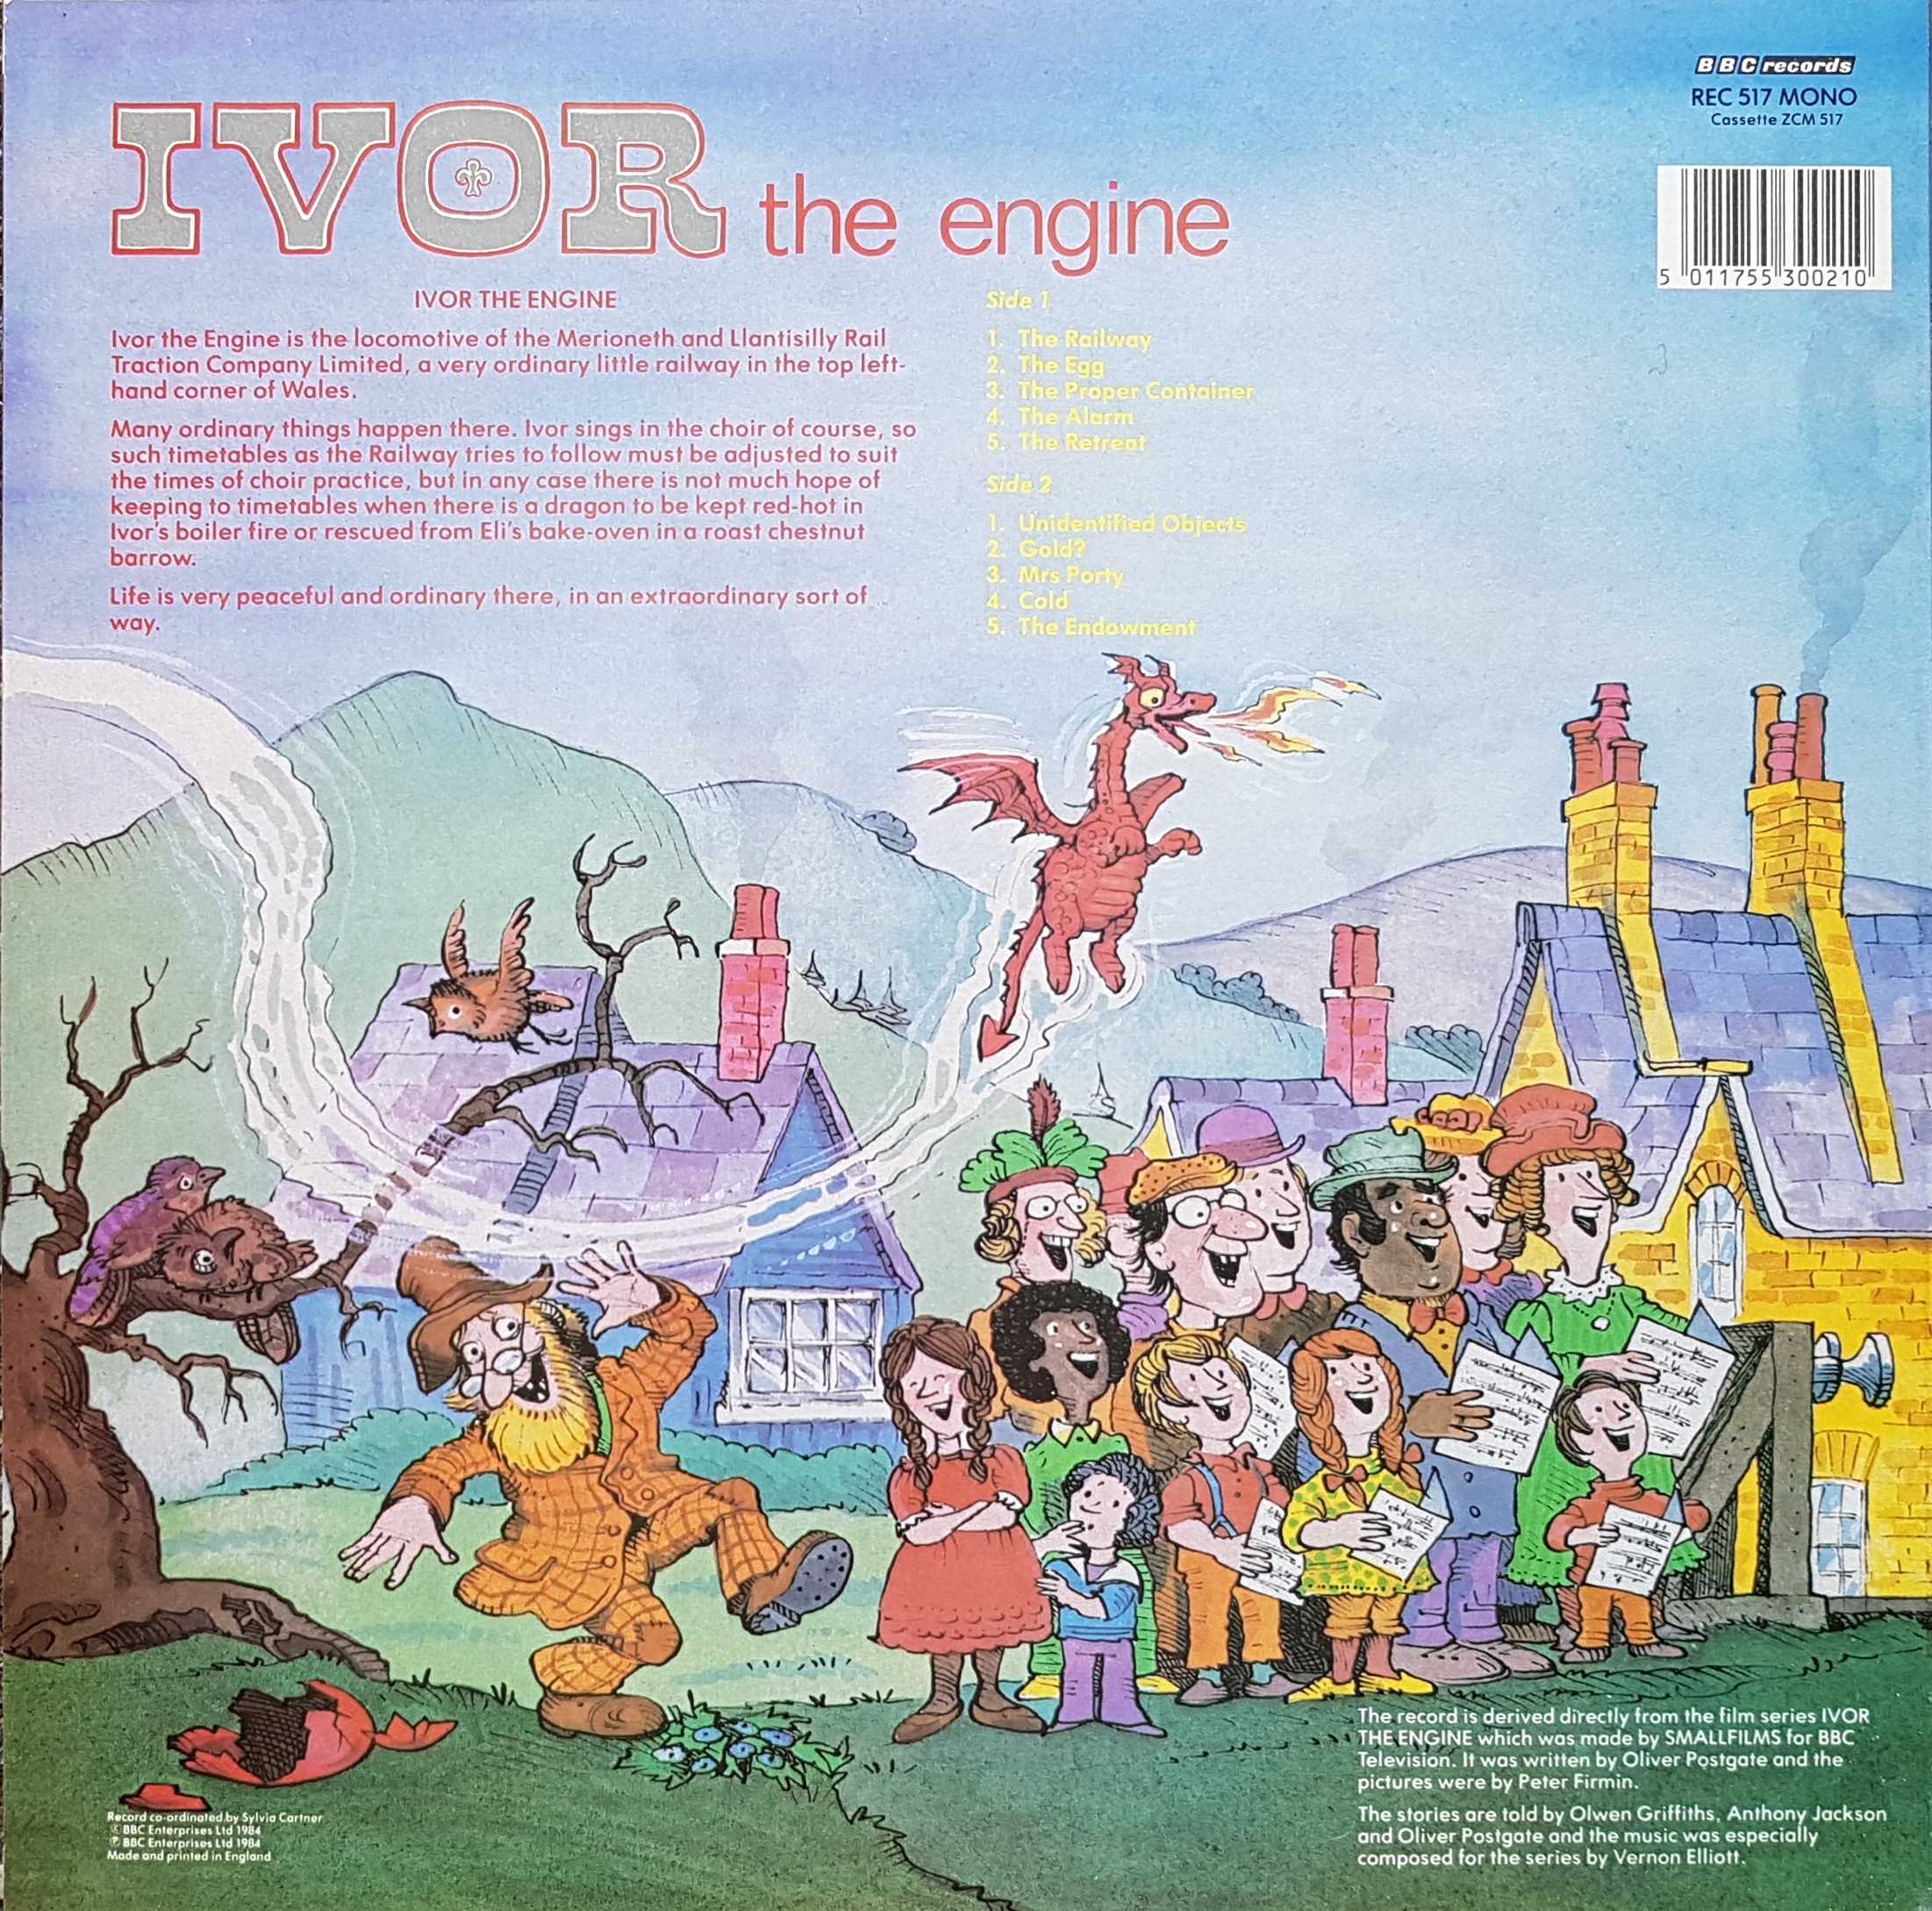 Picture of REC 517 Ivor the engine by artist Oliver Postgate from the BBC records and Tapes library